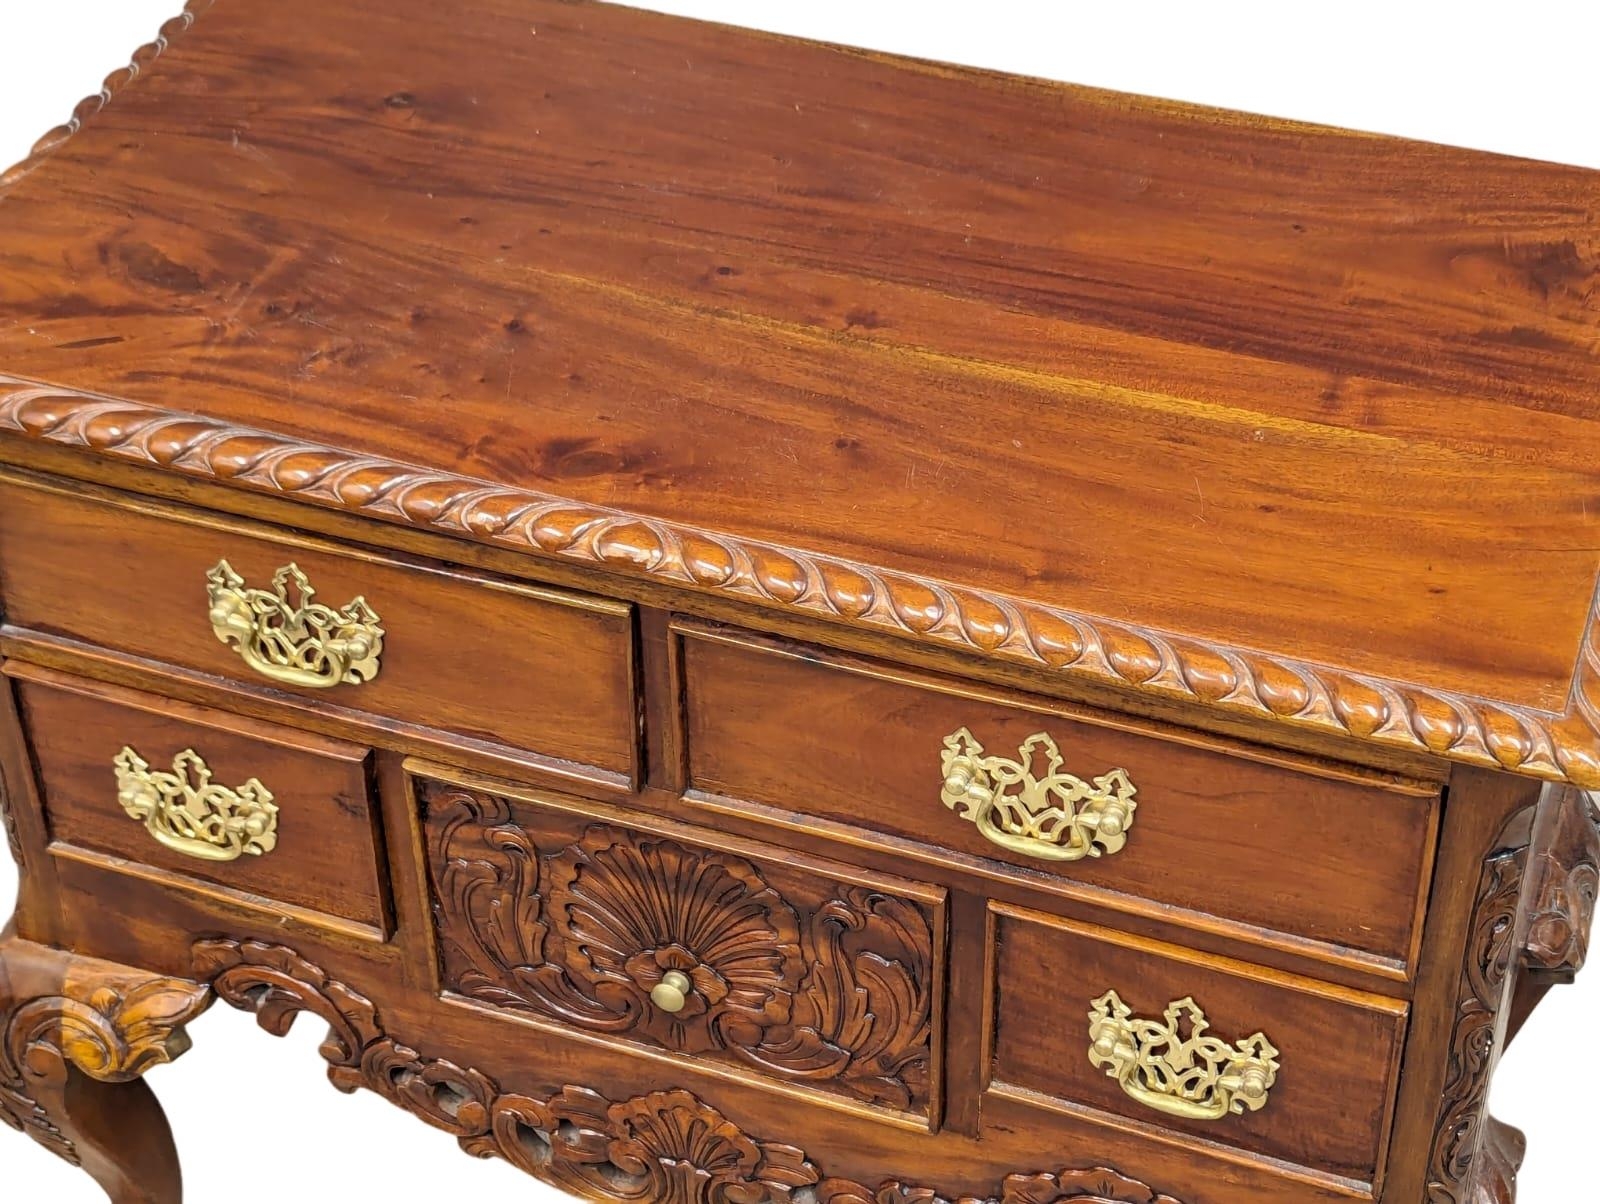 An American Pennsylvania Chippendale style mahogany chest of drawers on cabriole legs, 90cm x 47cm x - Image 4 of 6